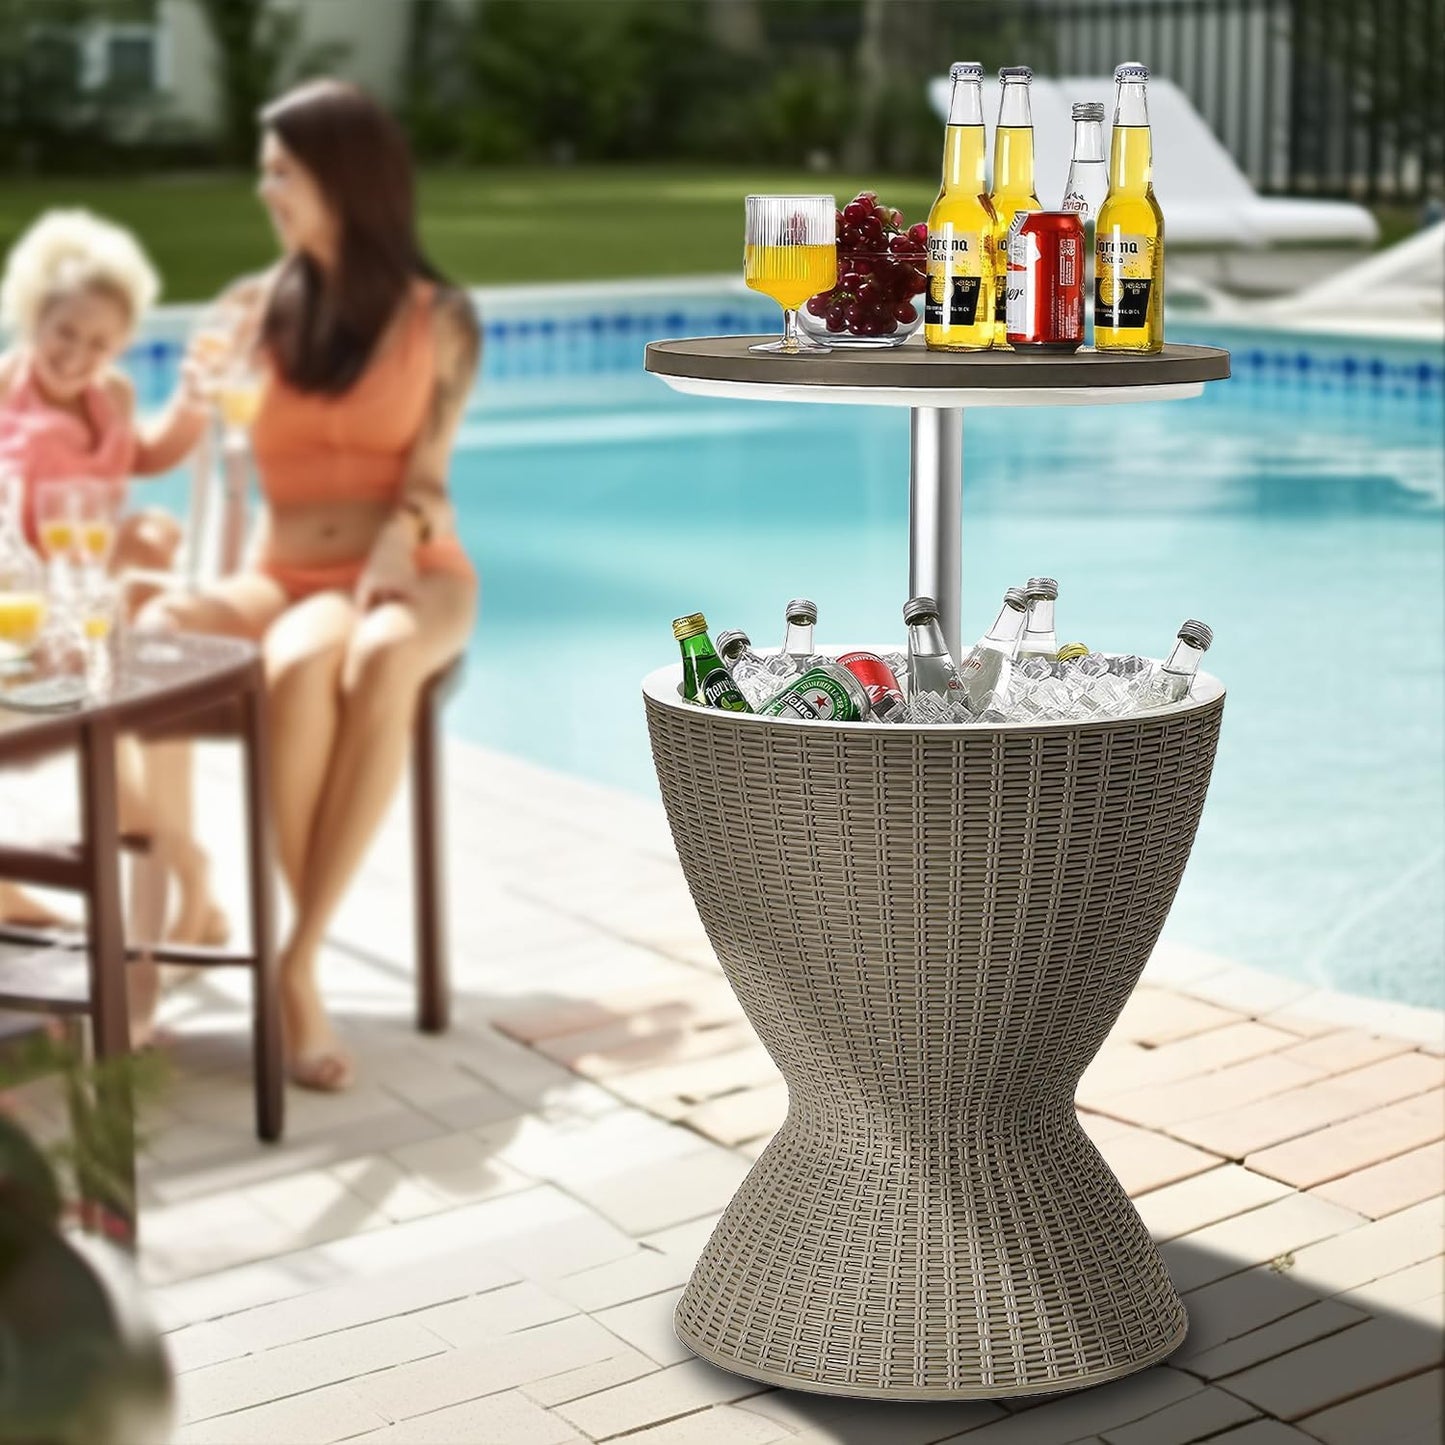 OUTSTANDING Outdoor Cool Bar Table, 8 Gallon Beer and Wine Cooler Table, Patio Furniture & Hot Tub Side Table, Beverage Cooler, Rattan Style Patio, Cocktail Bar for Patio Pool Party-Grey